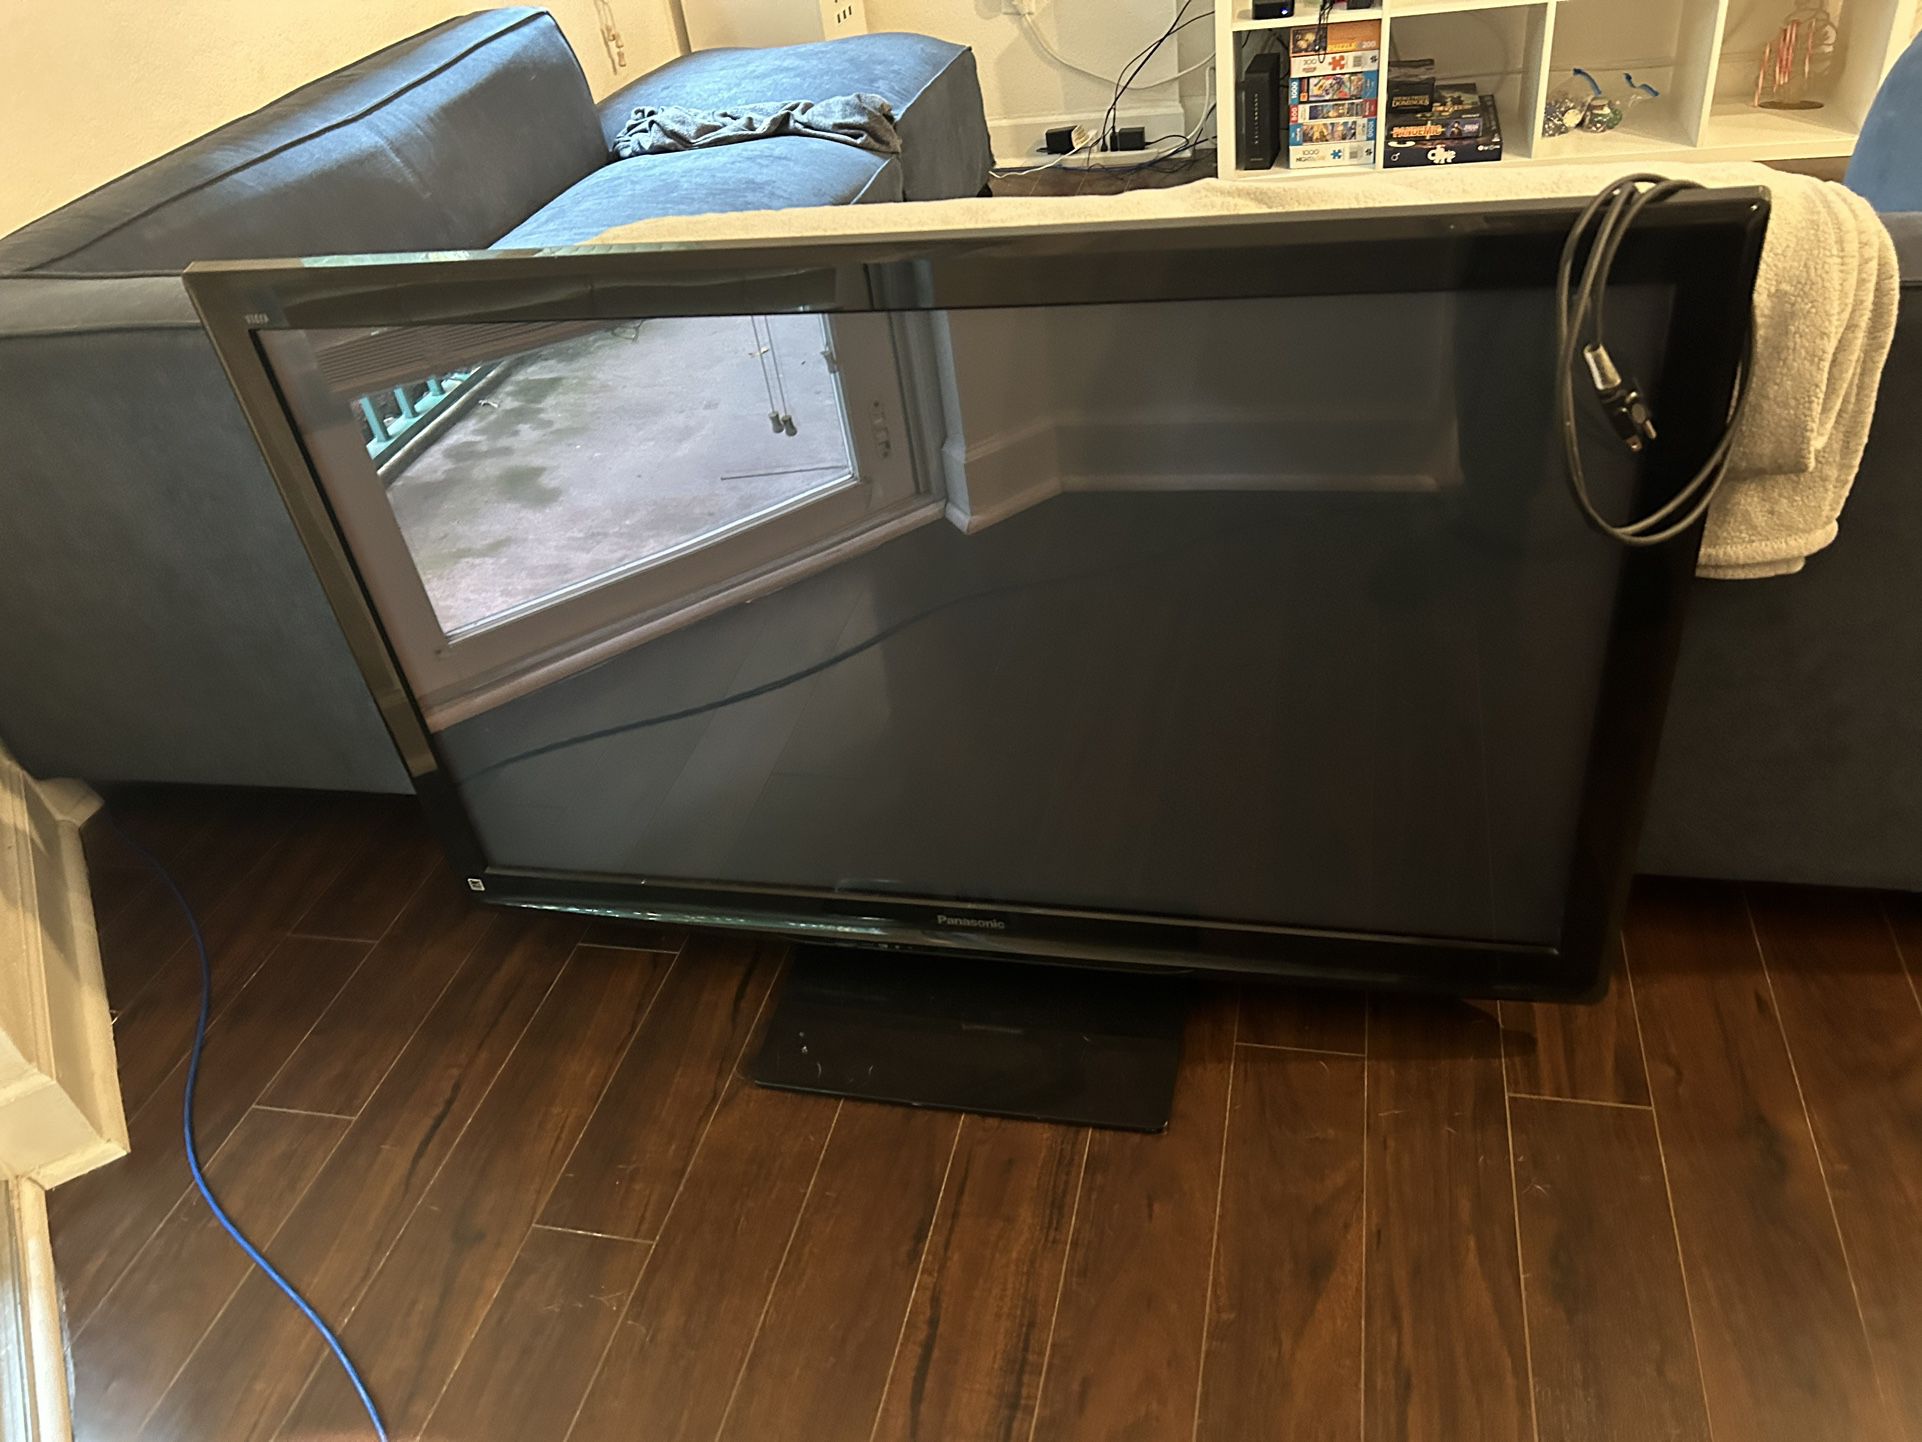 55” Panasonic TV and Apple TV With Remote Control 